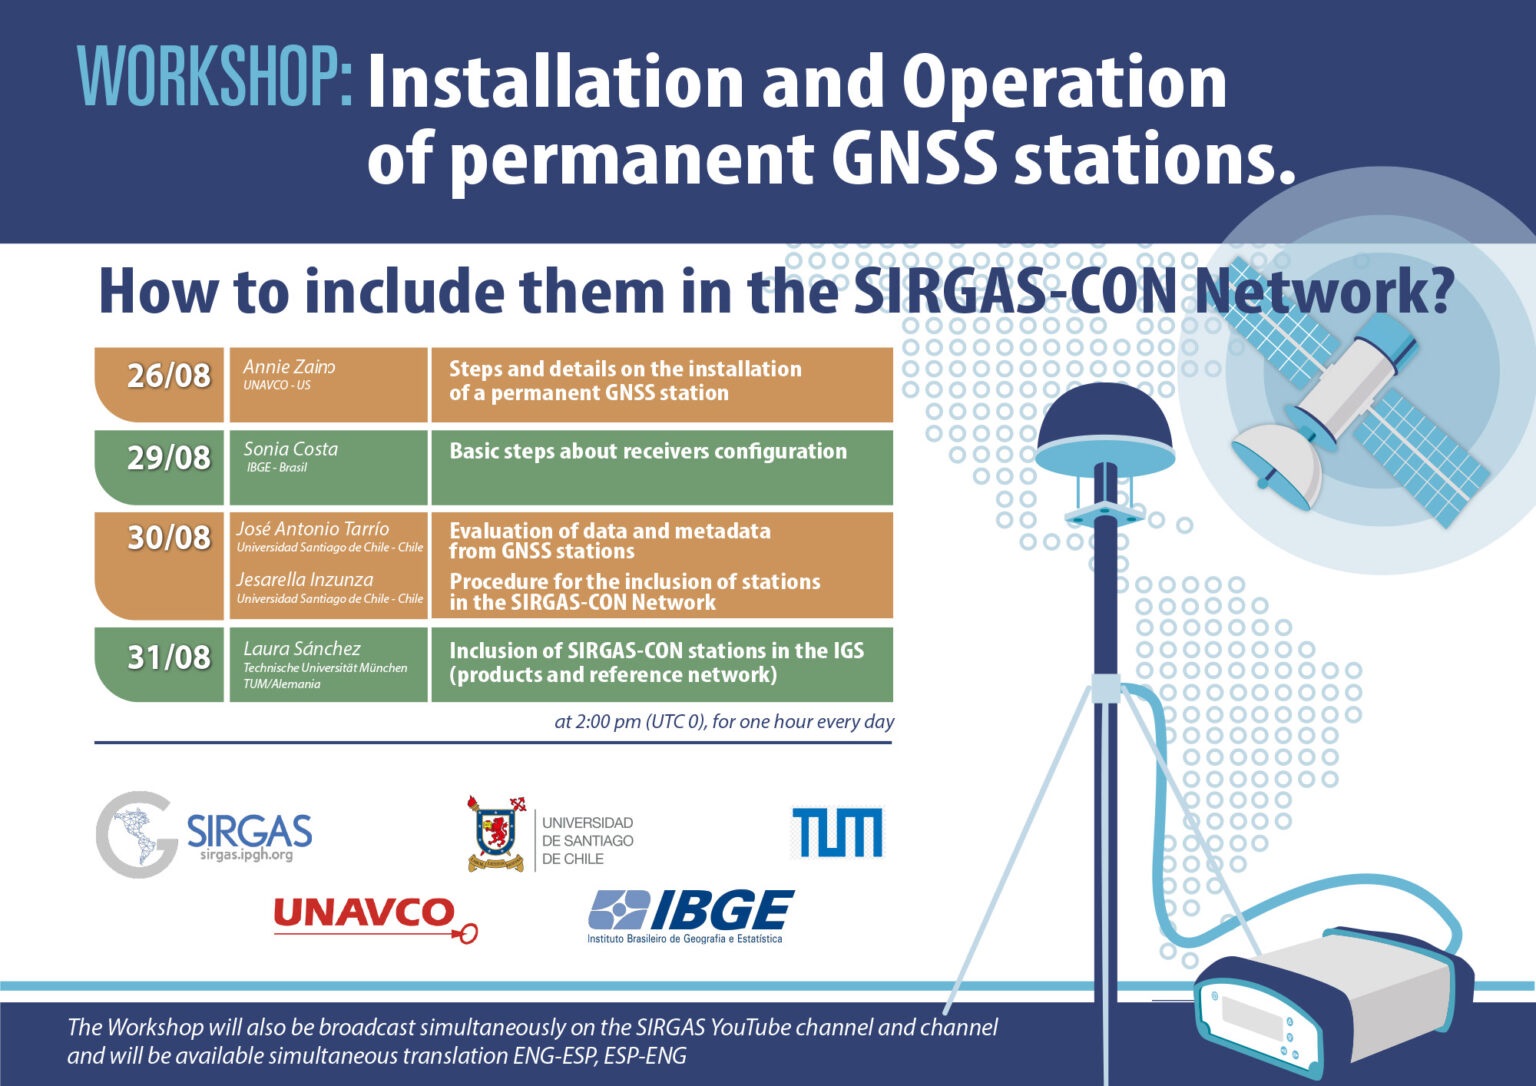 Workshop “Installation and operation of permanent GNSS stations. How to include them in SIRGAS-CON?”